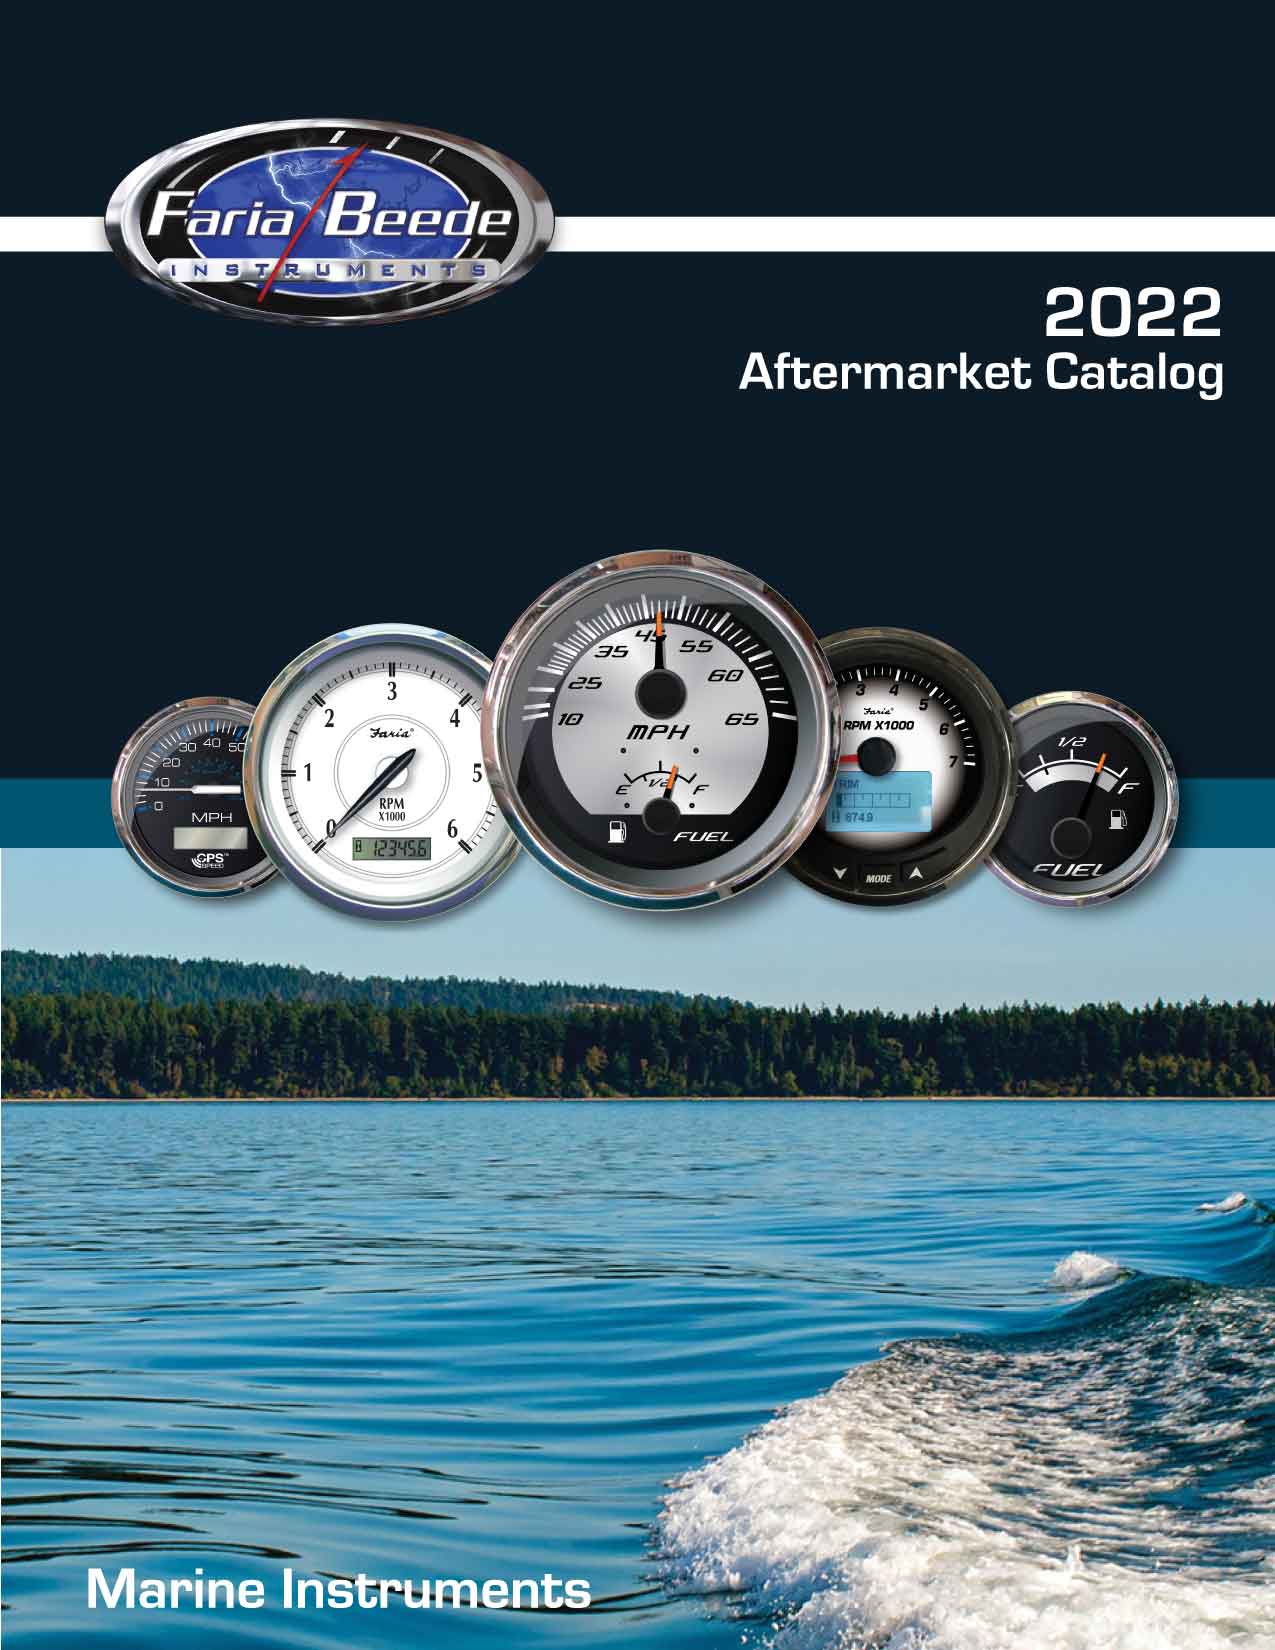 Search the Aftermarket catalog